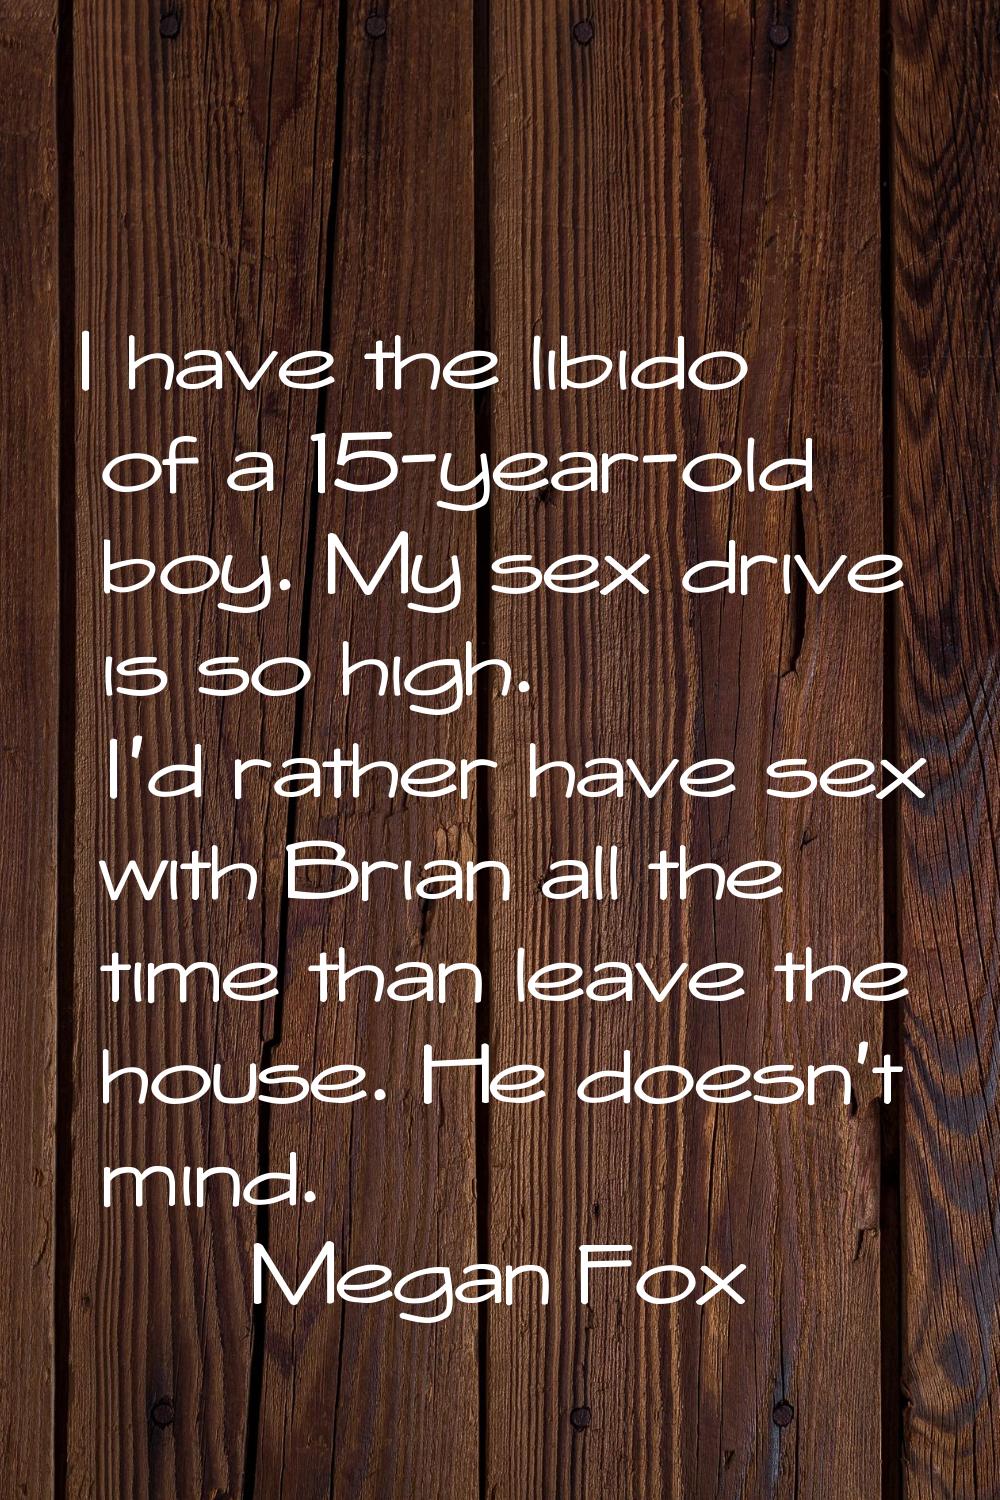 I have the libido of a 15-year-old boy. My sex drive is so high. I'd rather have sex with Brian all